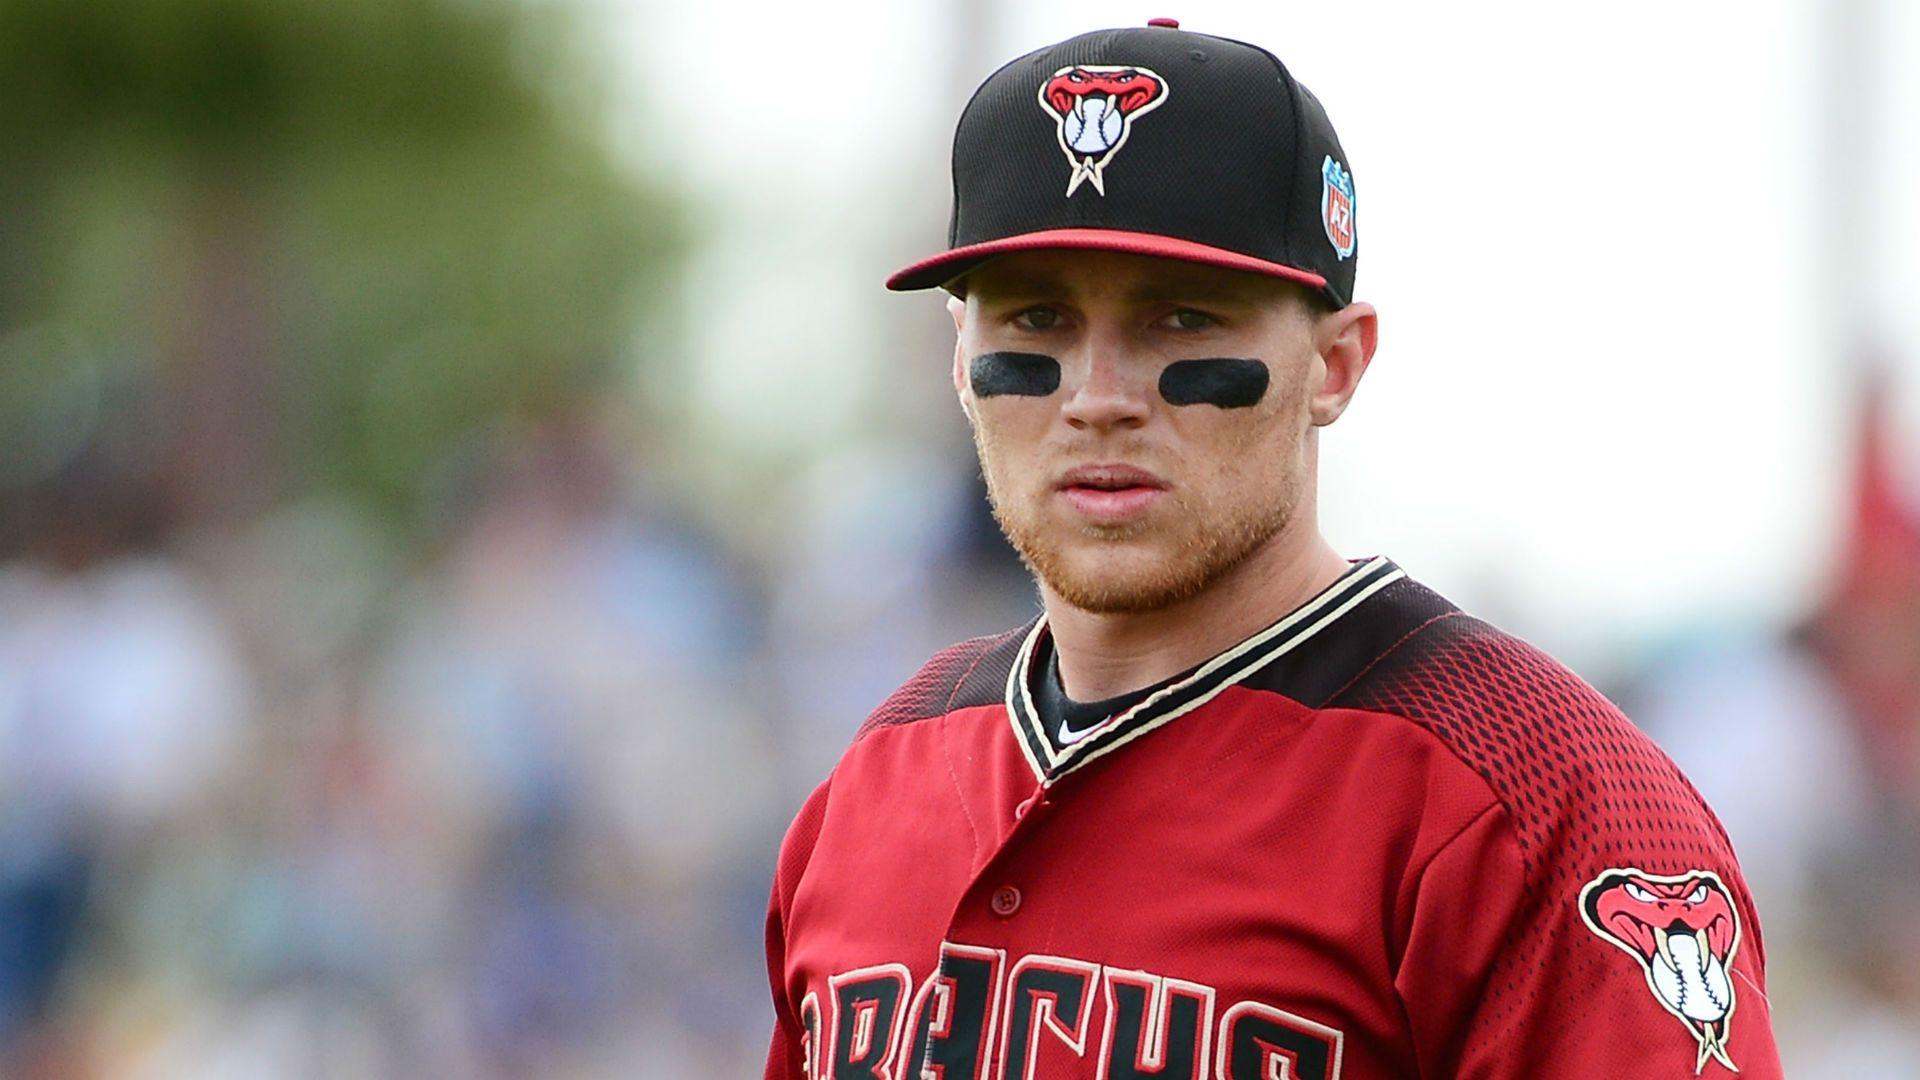 Spring Training Scouting Report: D Backs Loaded With Young Talent